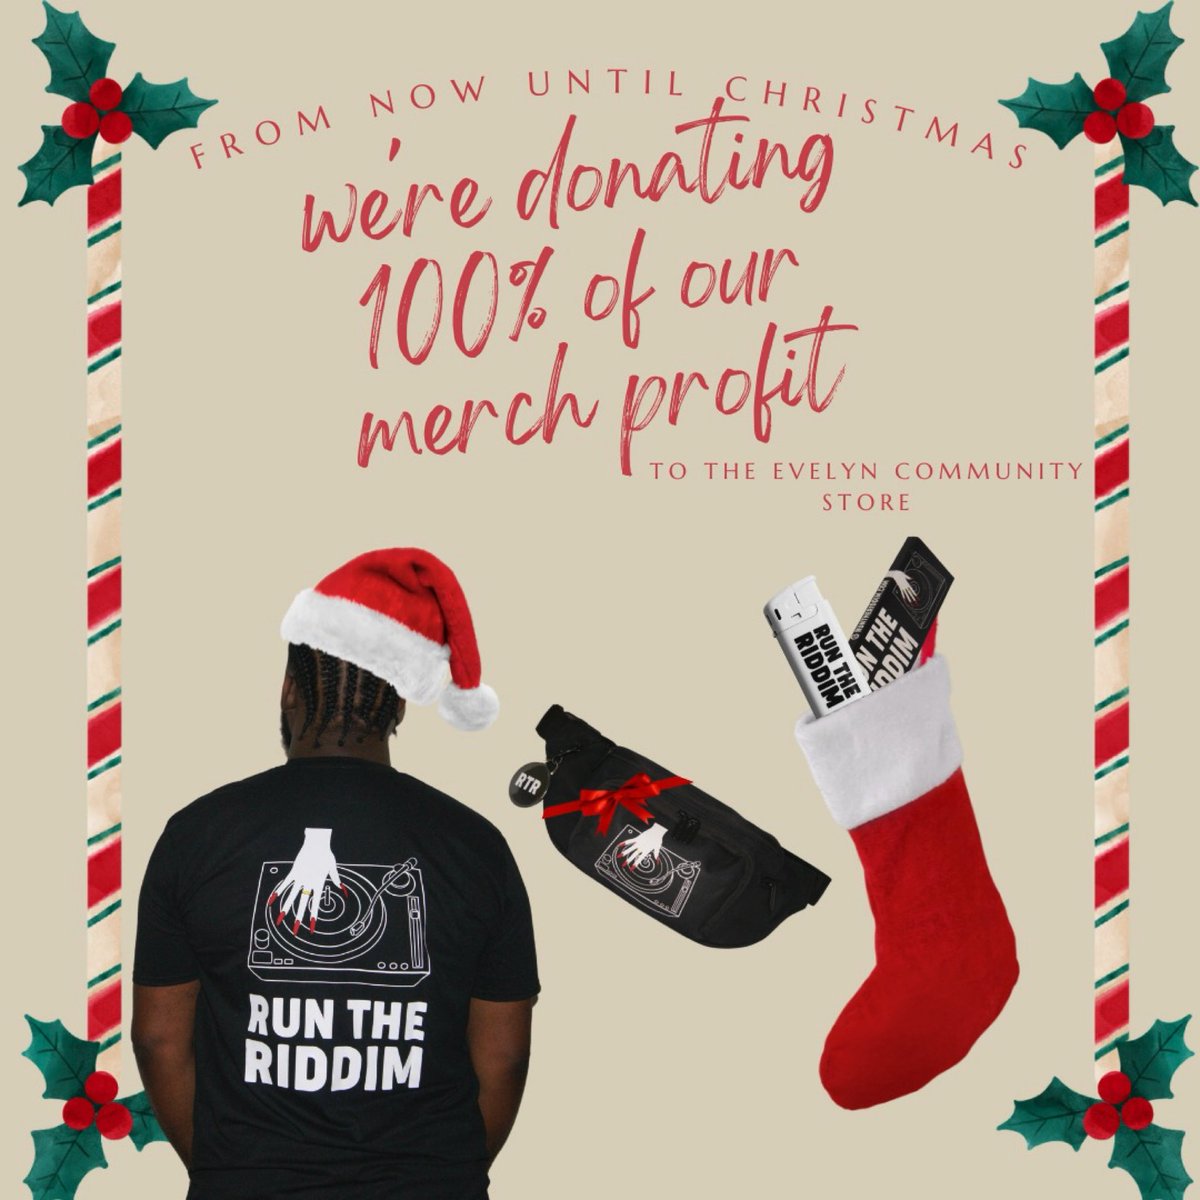 Our annual Xmas charity drive is here! 🎄 

All of the profit made on RTR merch up until Christmas will go to @StoreEvelyn to help fund the amazing work they do for the community. 

We don’t have much but what we do have, we share.

#ENDFOODPOVERTY

 runtheriddim.com/shop ❤️